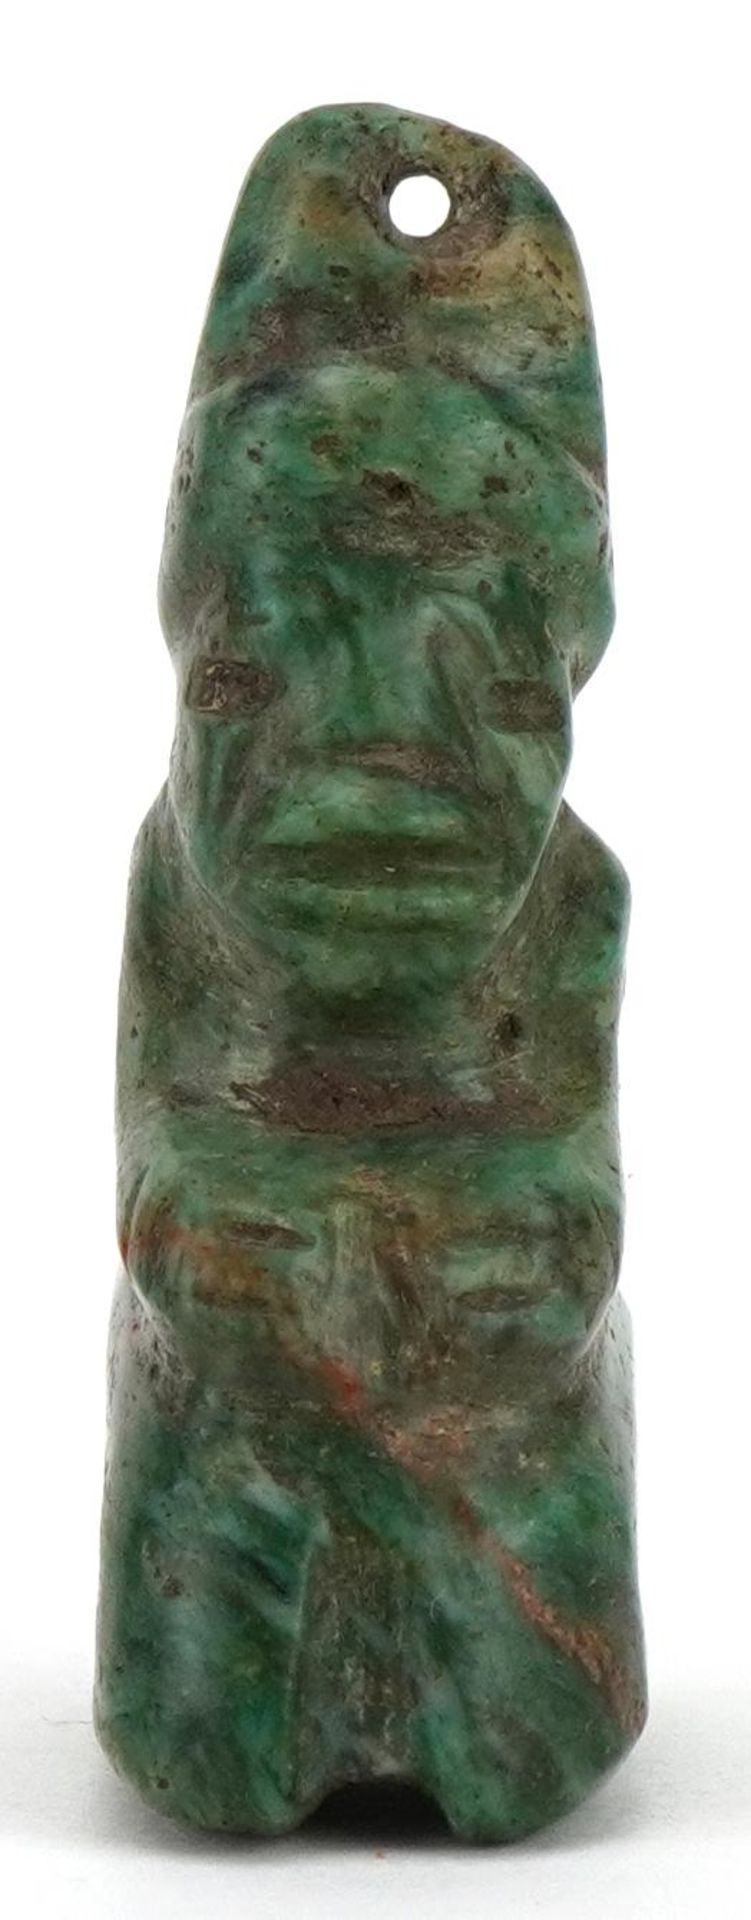 Tribal interest green hardstone figural pendant, probably Mayan or pre Columbian, 4.5cm high : For - Image 2 of 7